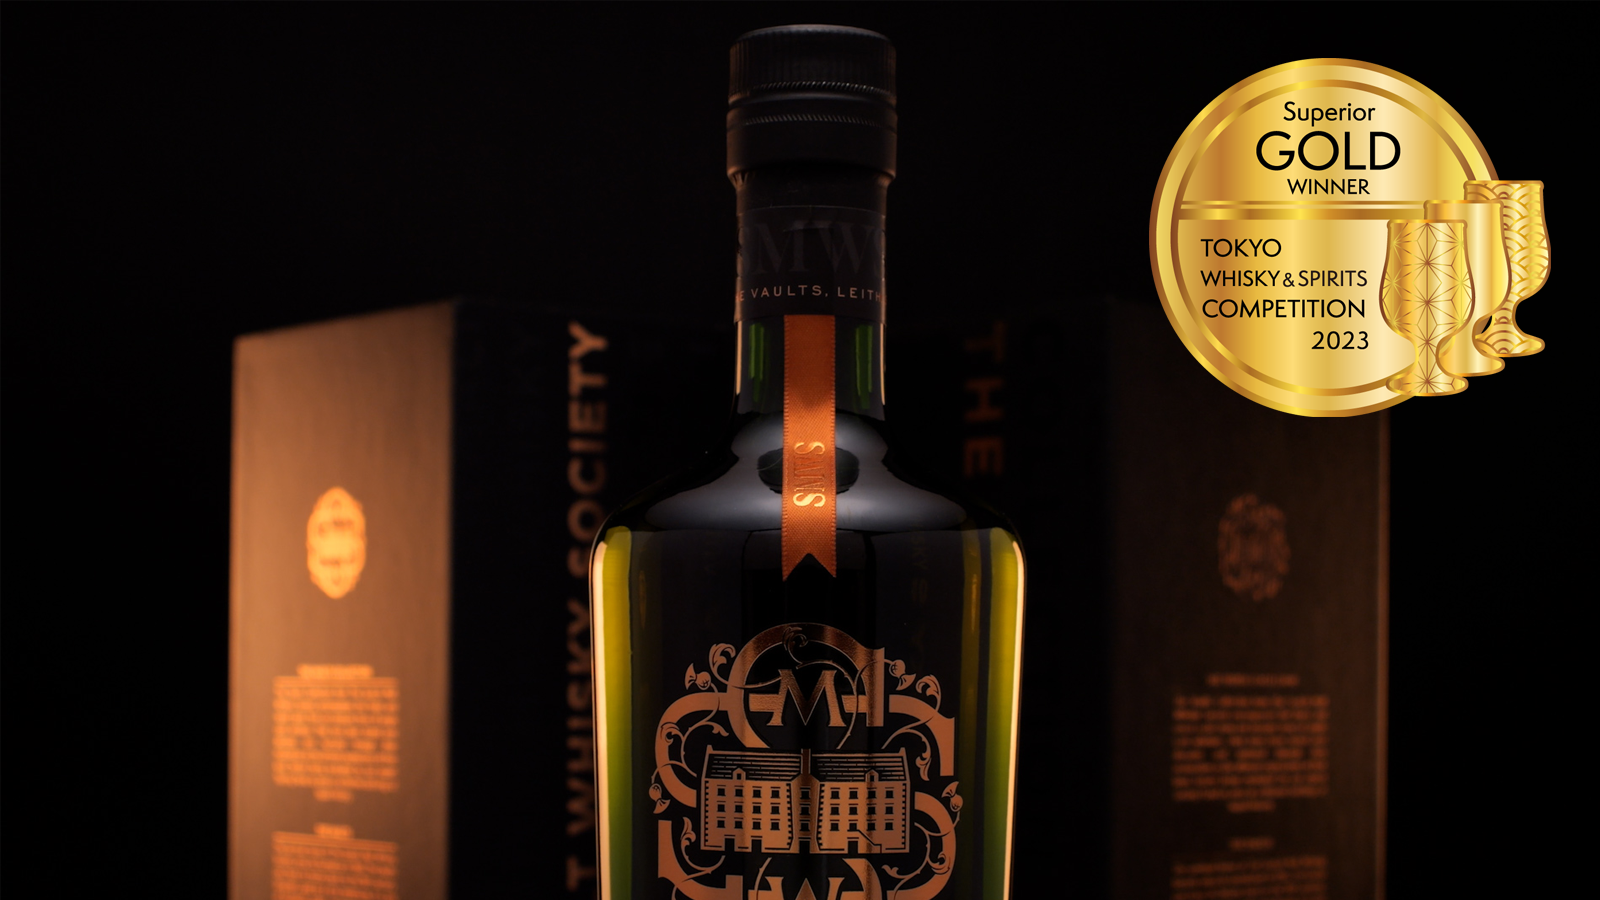 SOCIETY SCORES IN TOKYO SPIRITS COMPETITION - Scotch Malt Whisky 